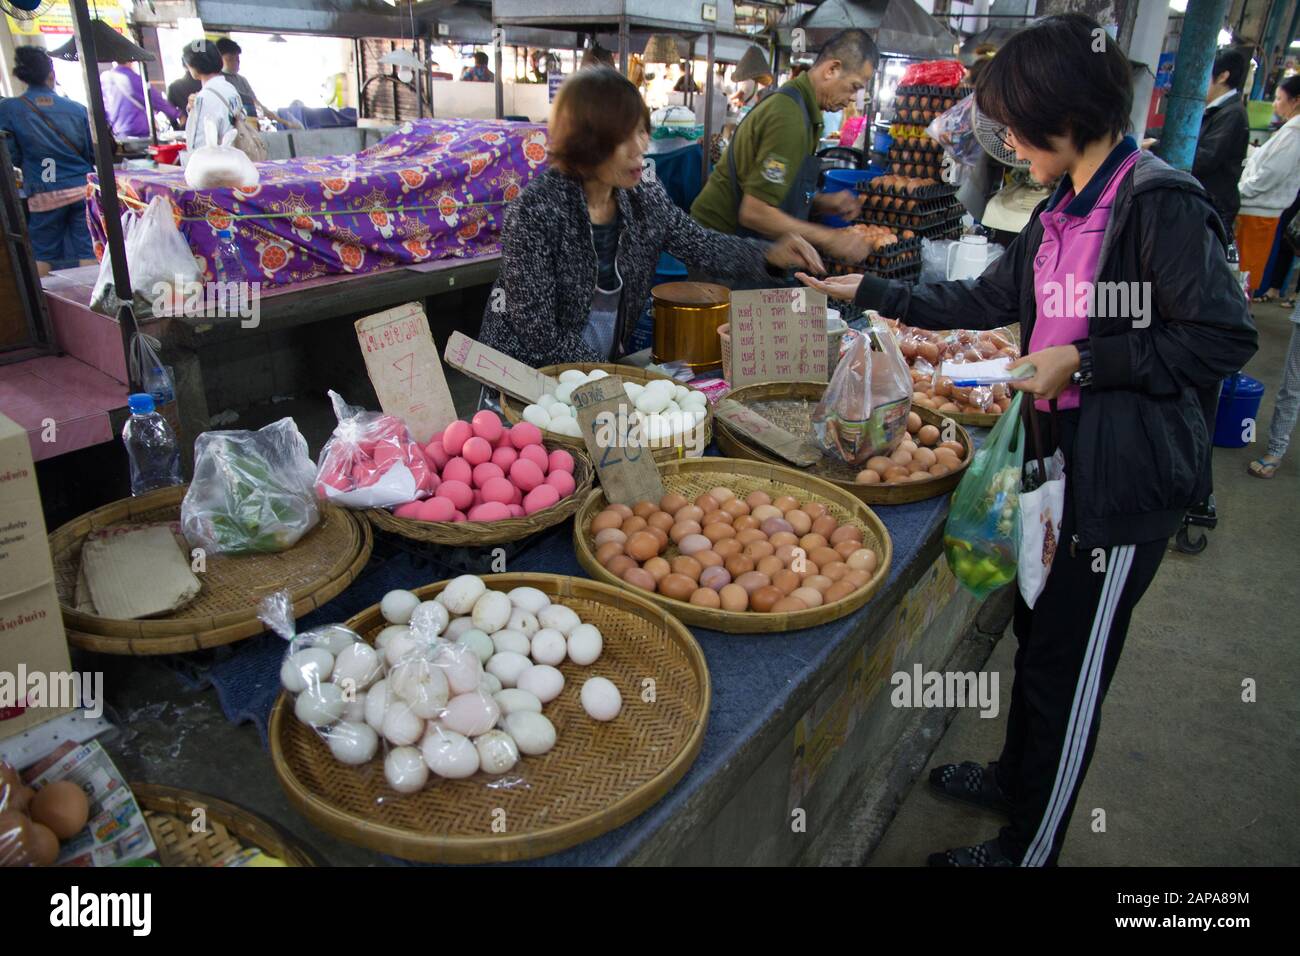 Chiang Mai market stall Eggs for sale in stall Thailand Chiang Mai Market Stock Photo